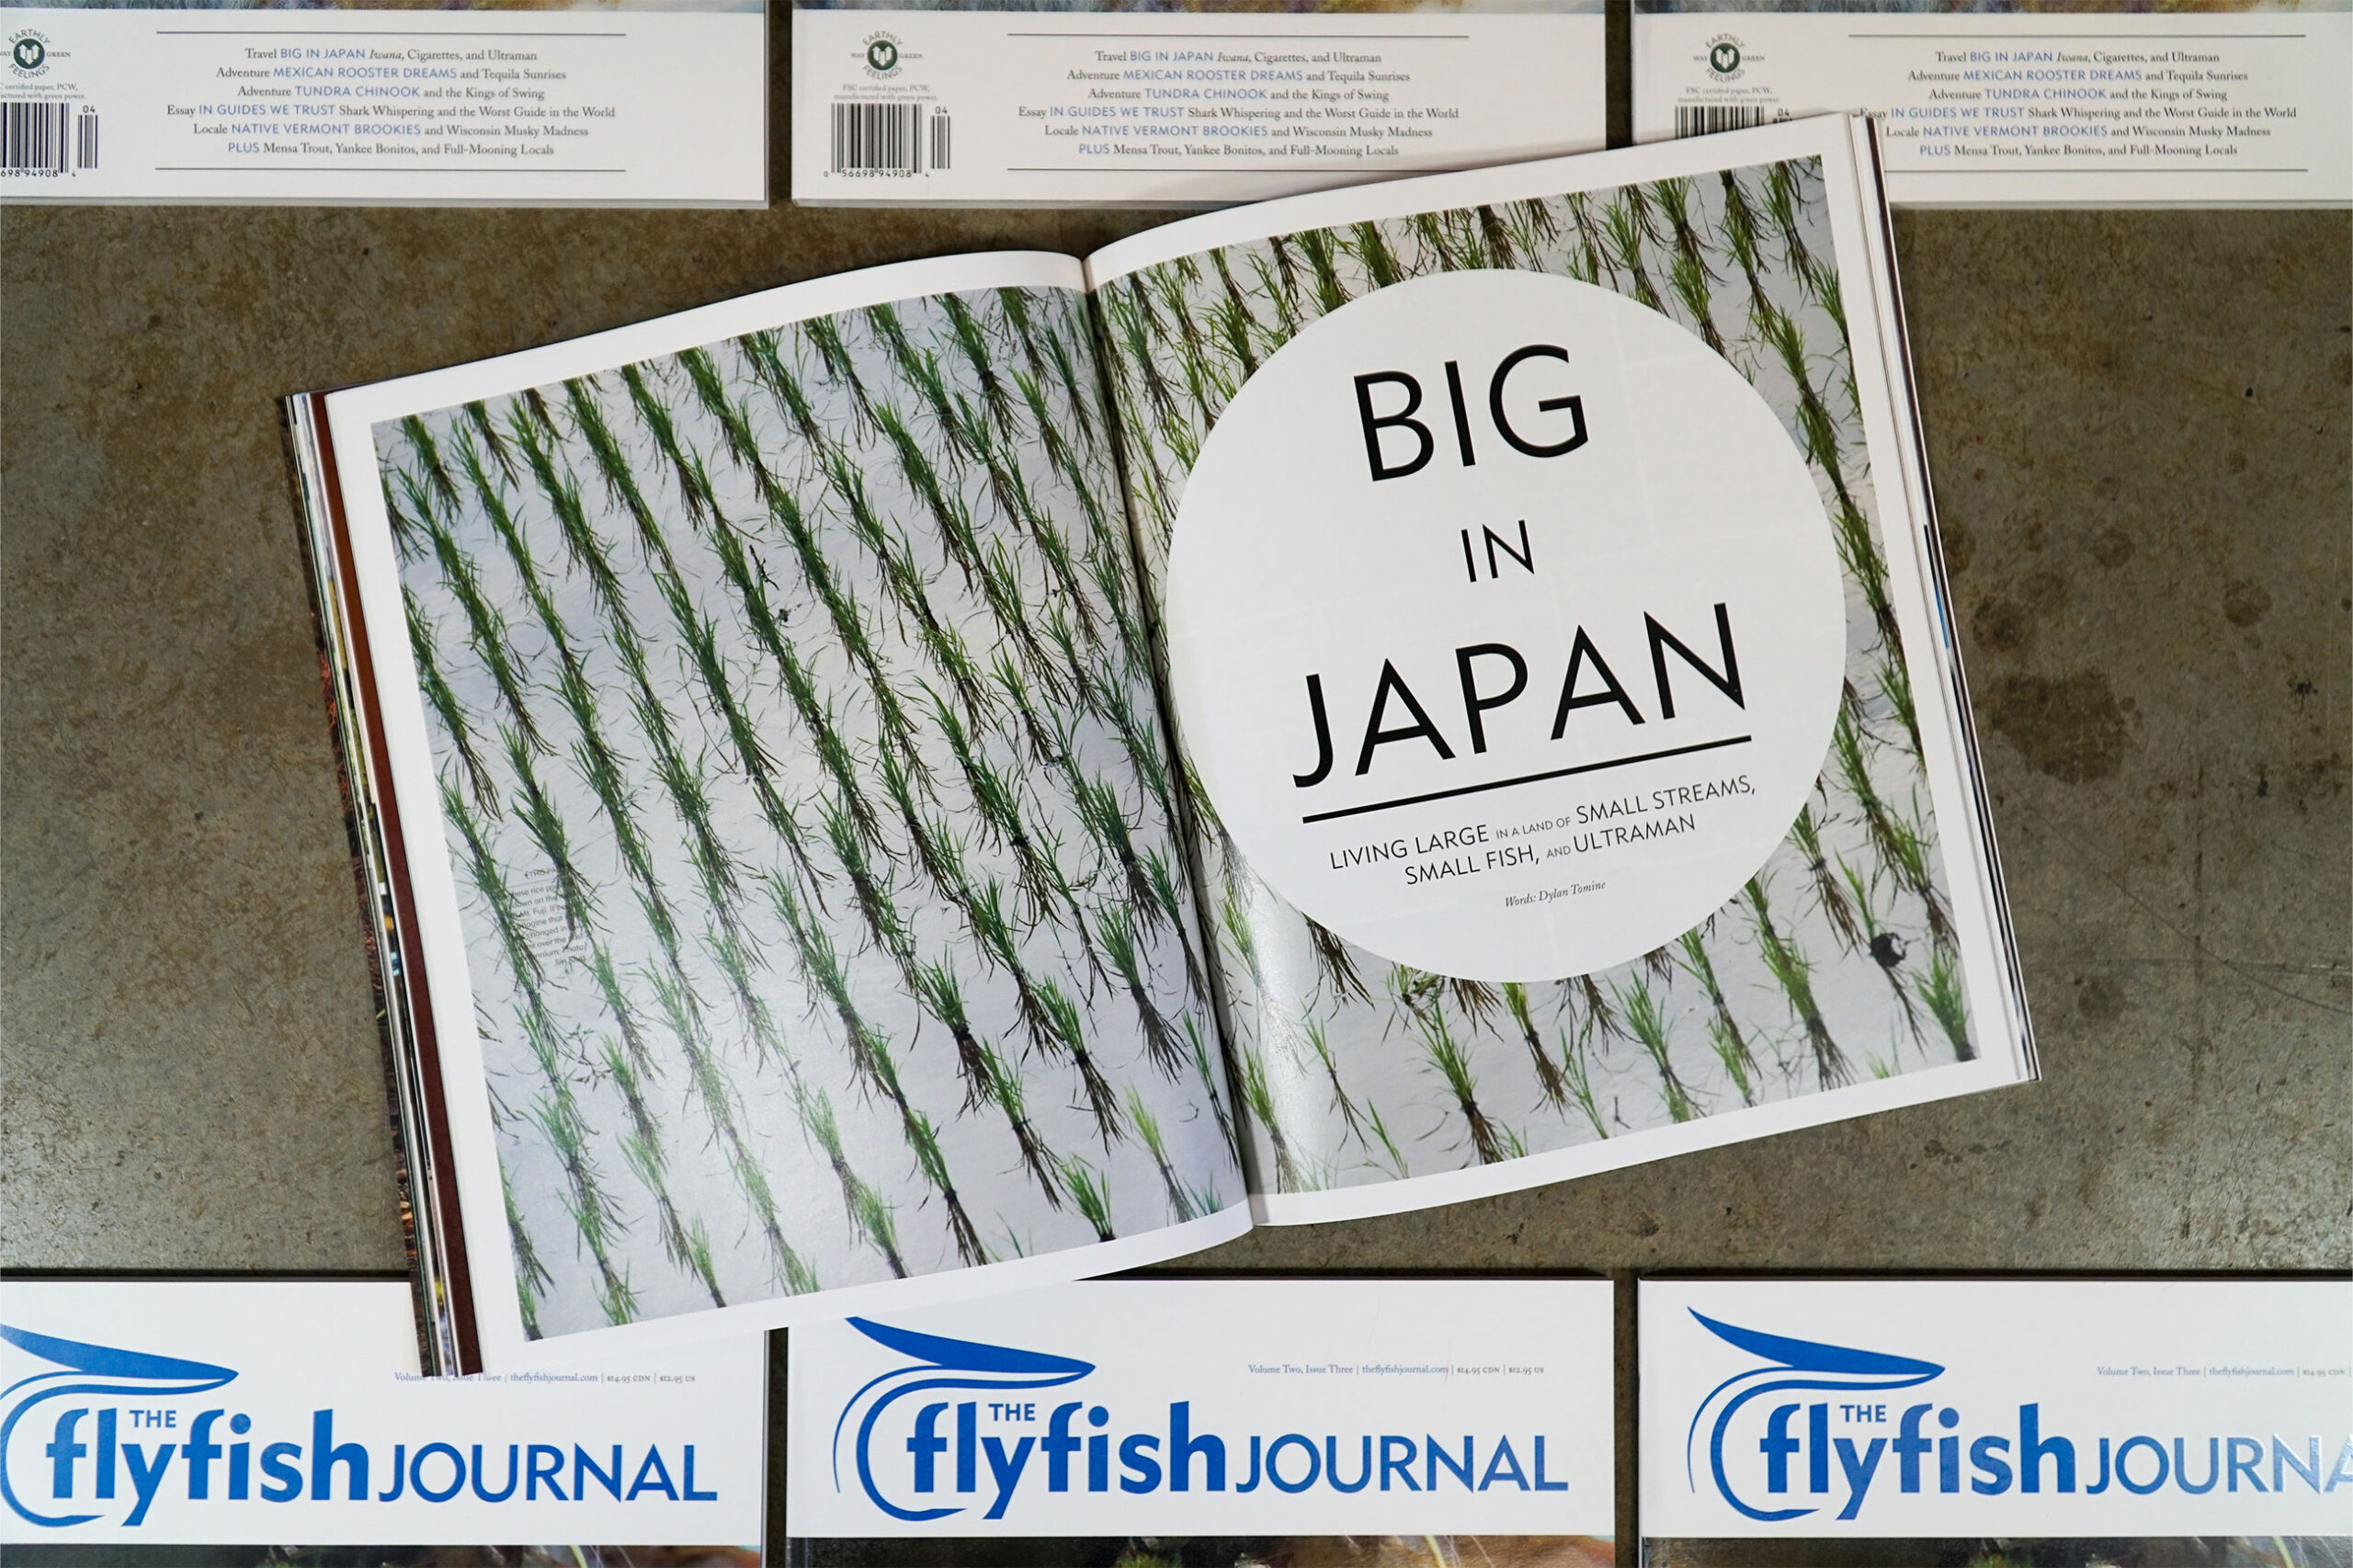 The Flyfish Journal Volume 2 Issue 3 Feature Big in Japan